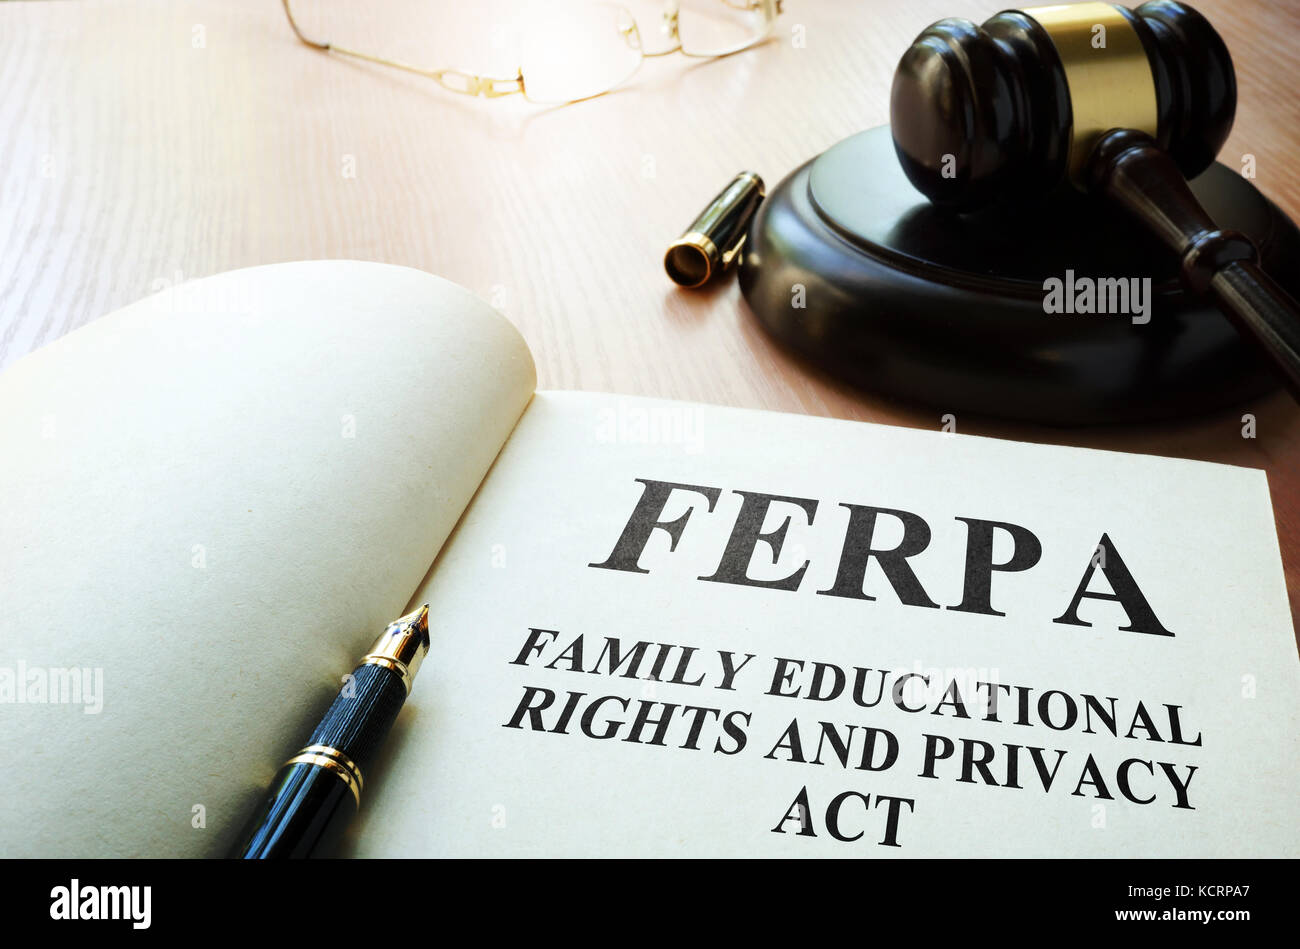 La FERPA (family educational rights and privacy act) sur une table. Banque D'Images